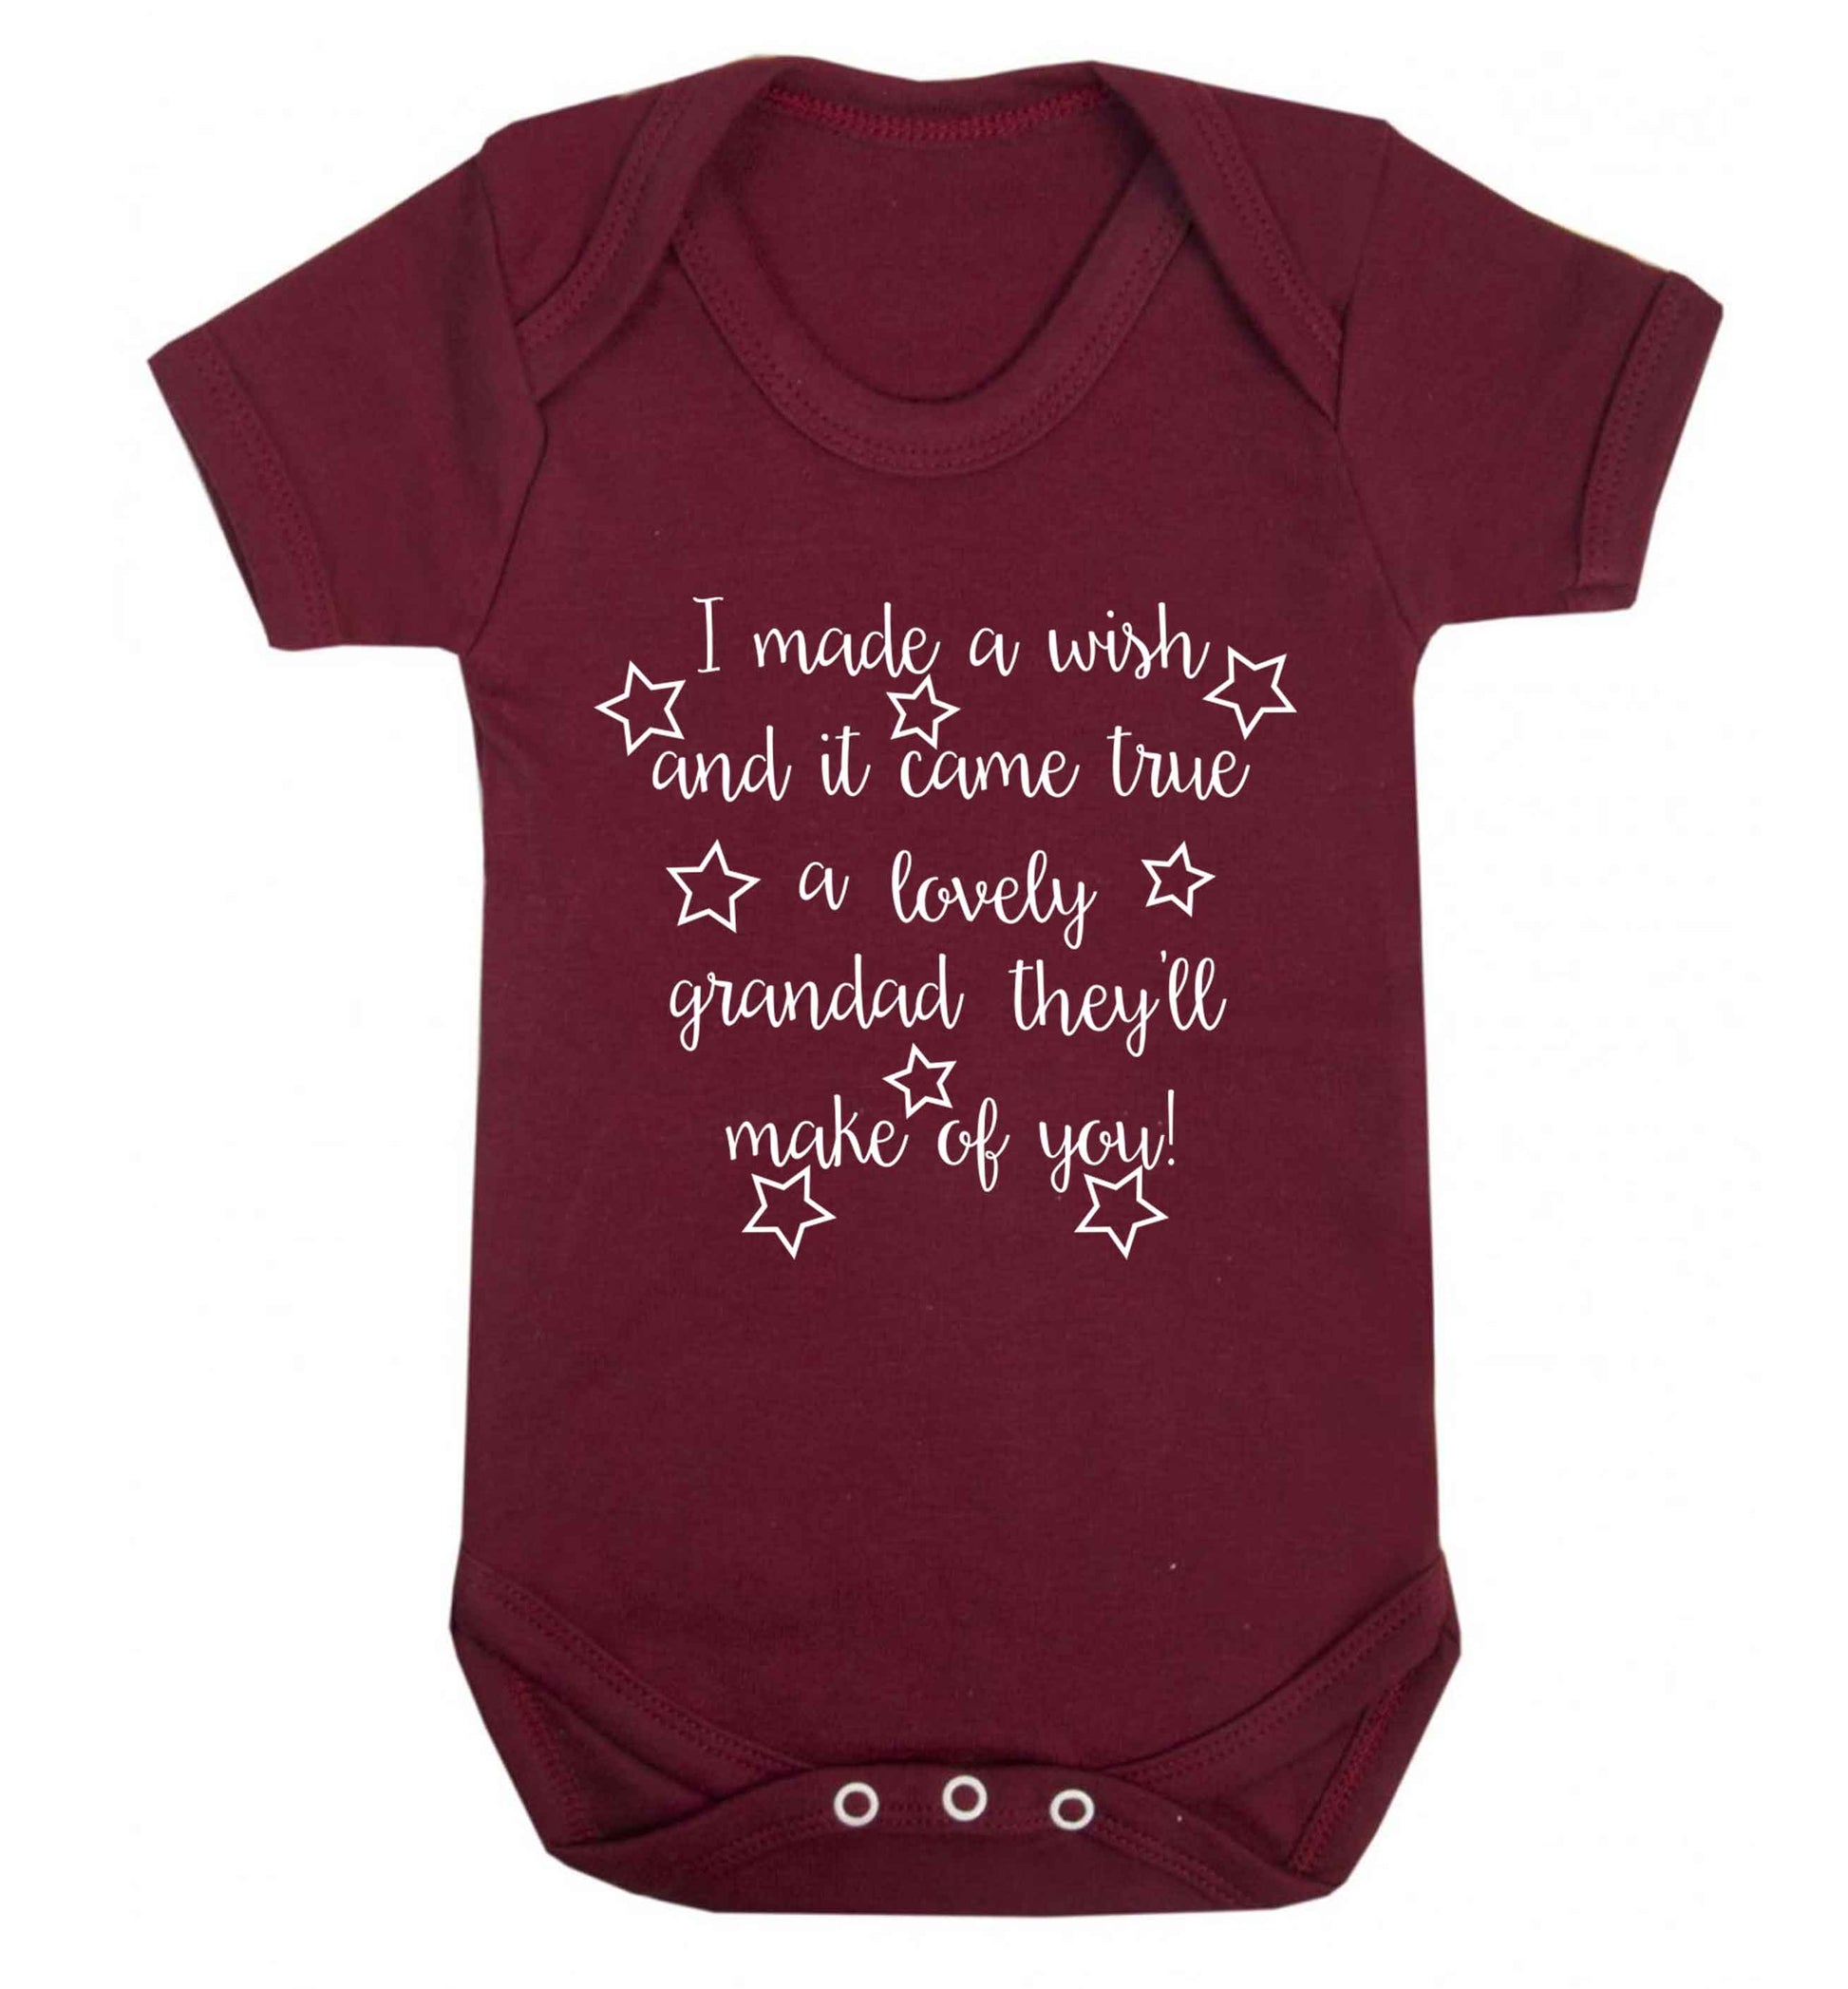 I made a wish and it came true a lovely grandad they'll make of you! Baby Vest maroon 18-24 months